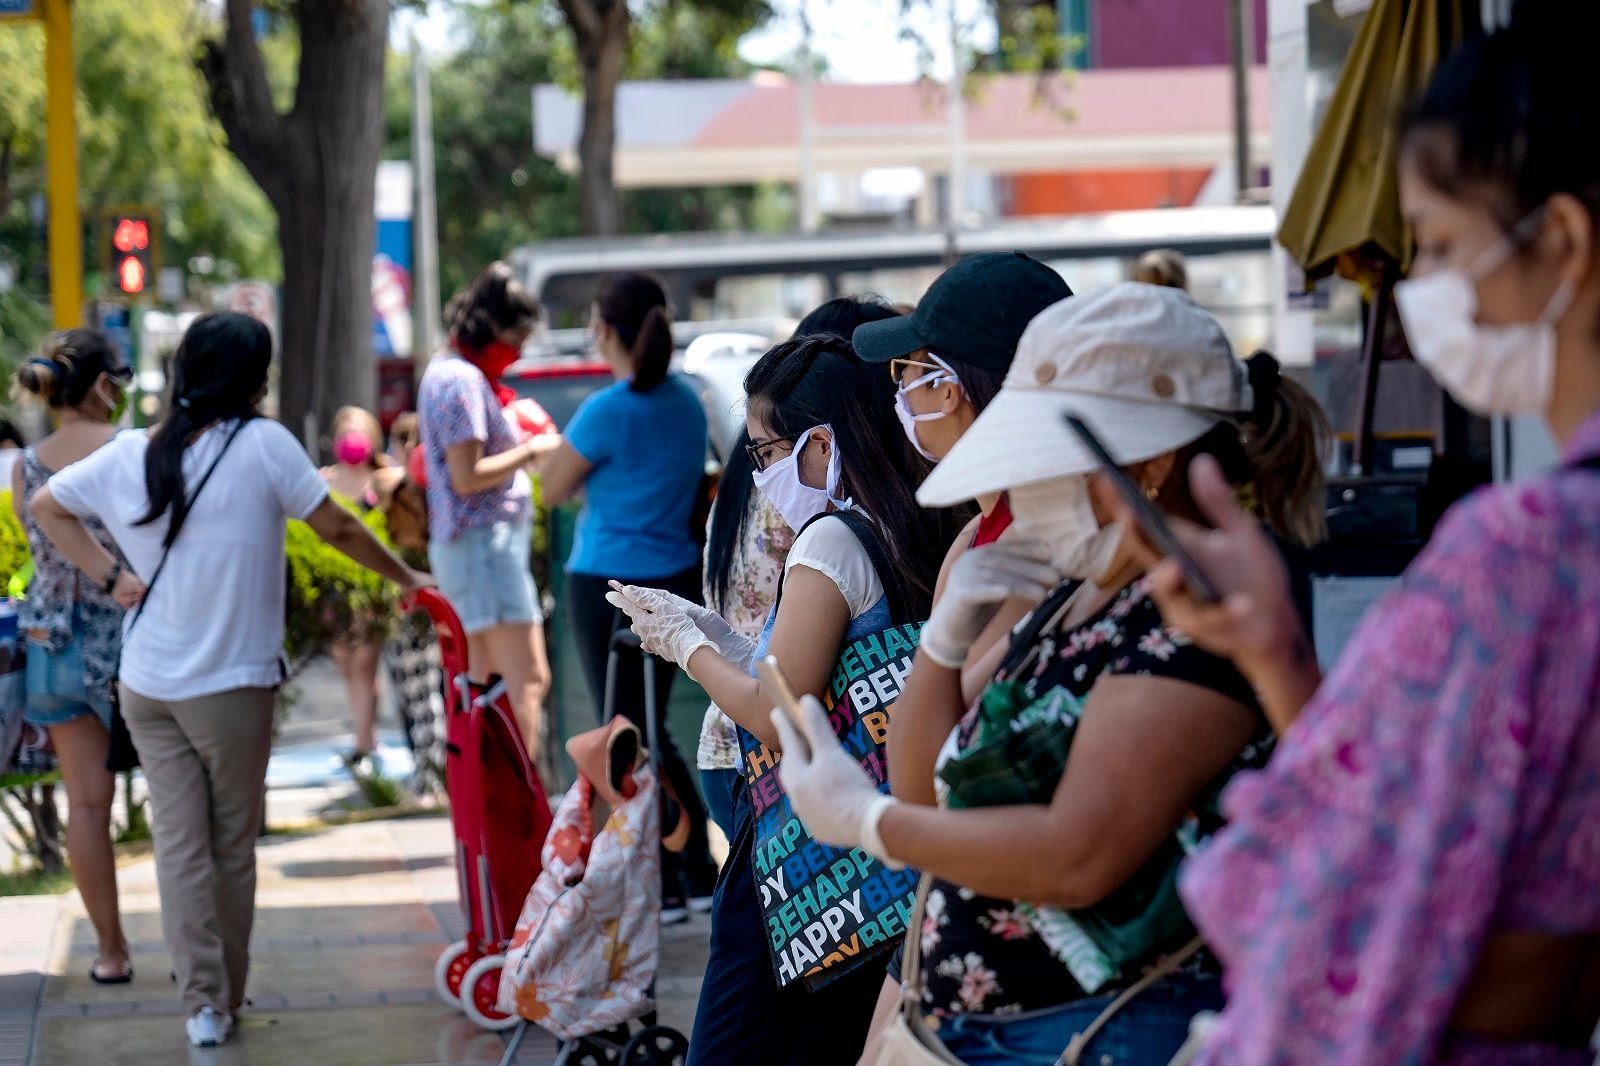 Image of people wearing masks using mobile technology in outdoor location